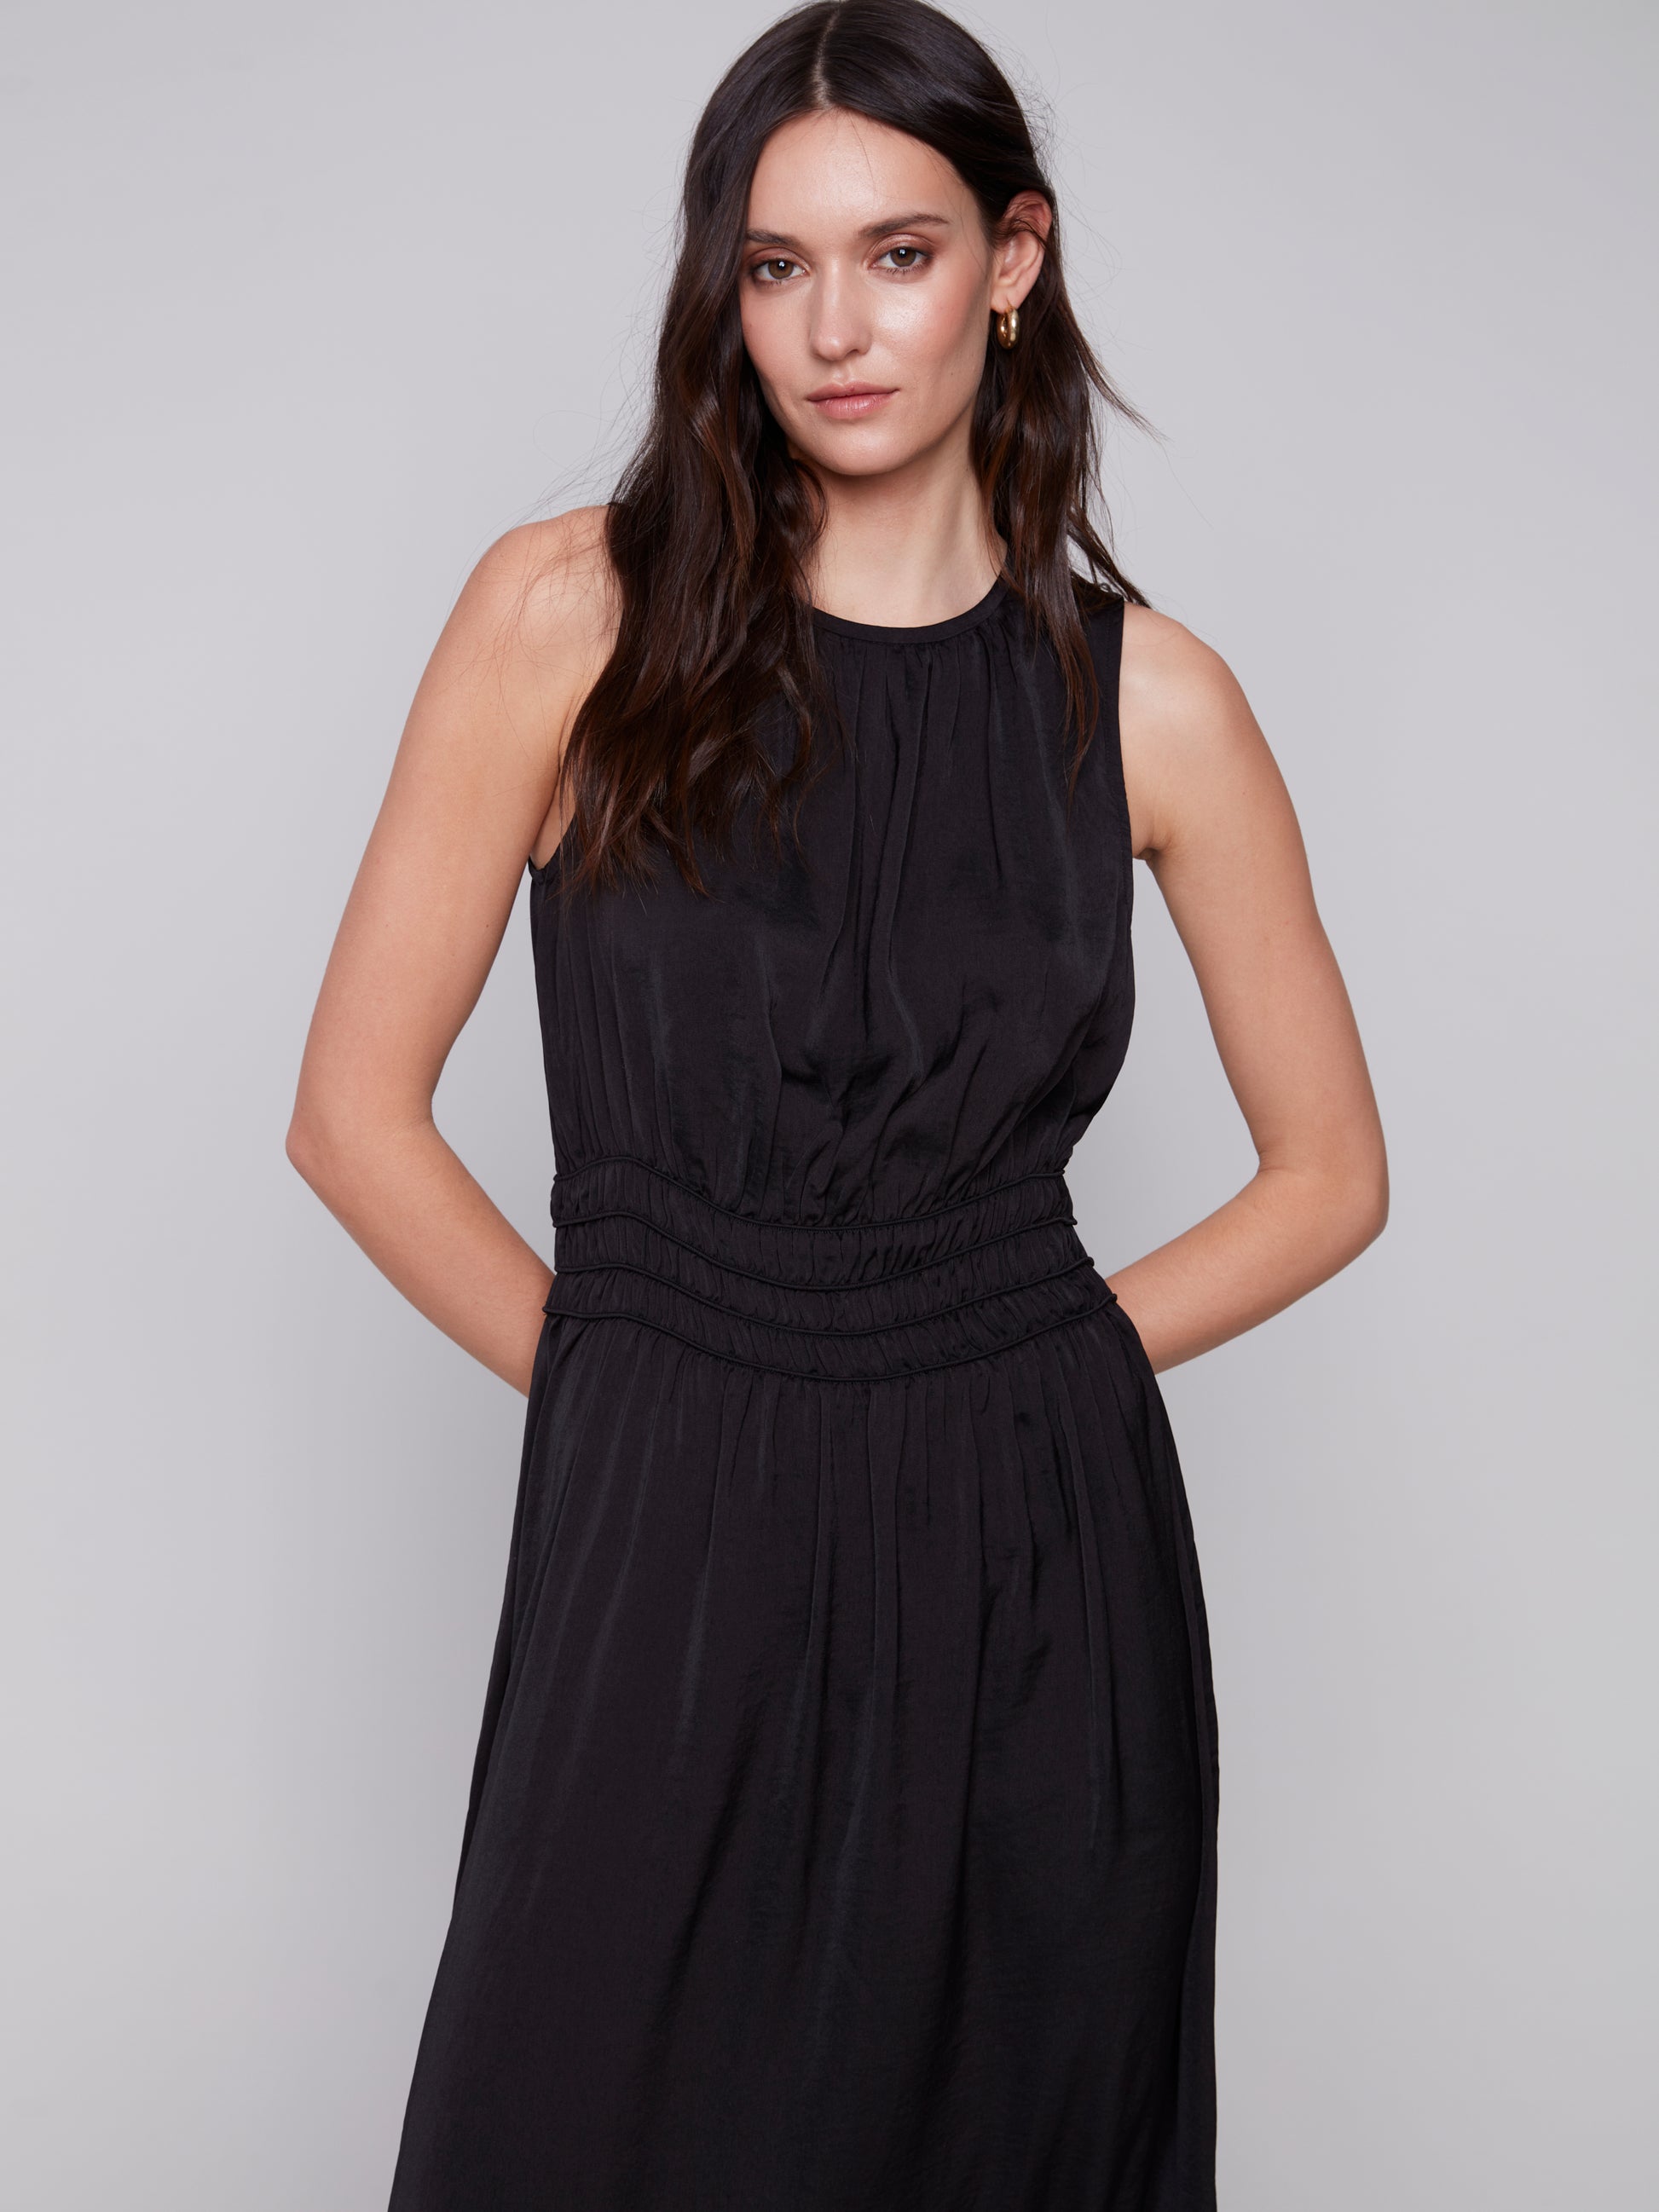 A woman in a Charlie B sleeveless black dress with an elastic smocking waist and strappy heels stands against a plain background.